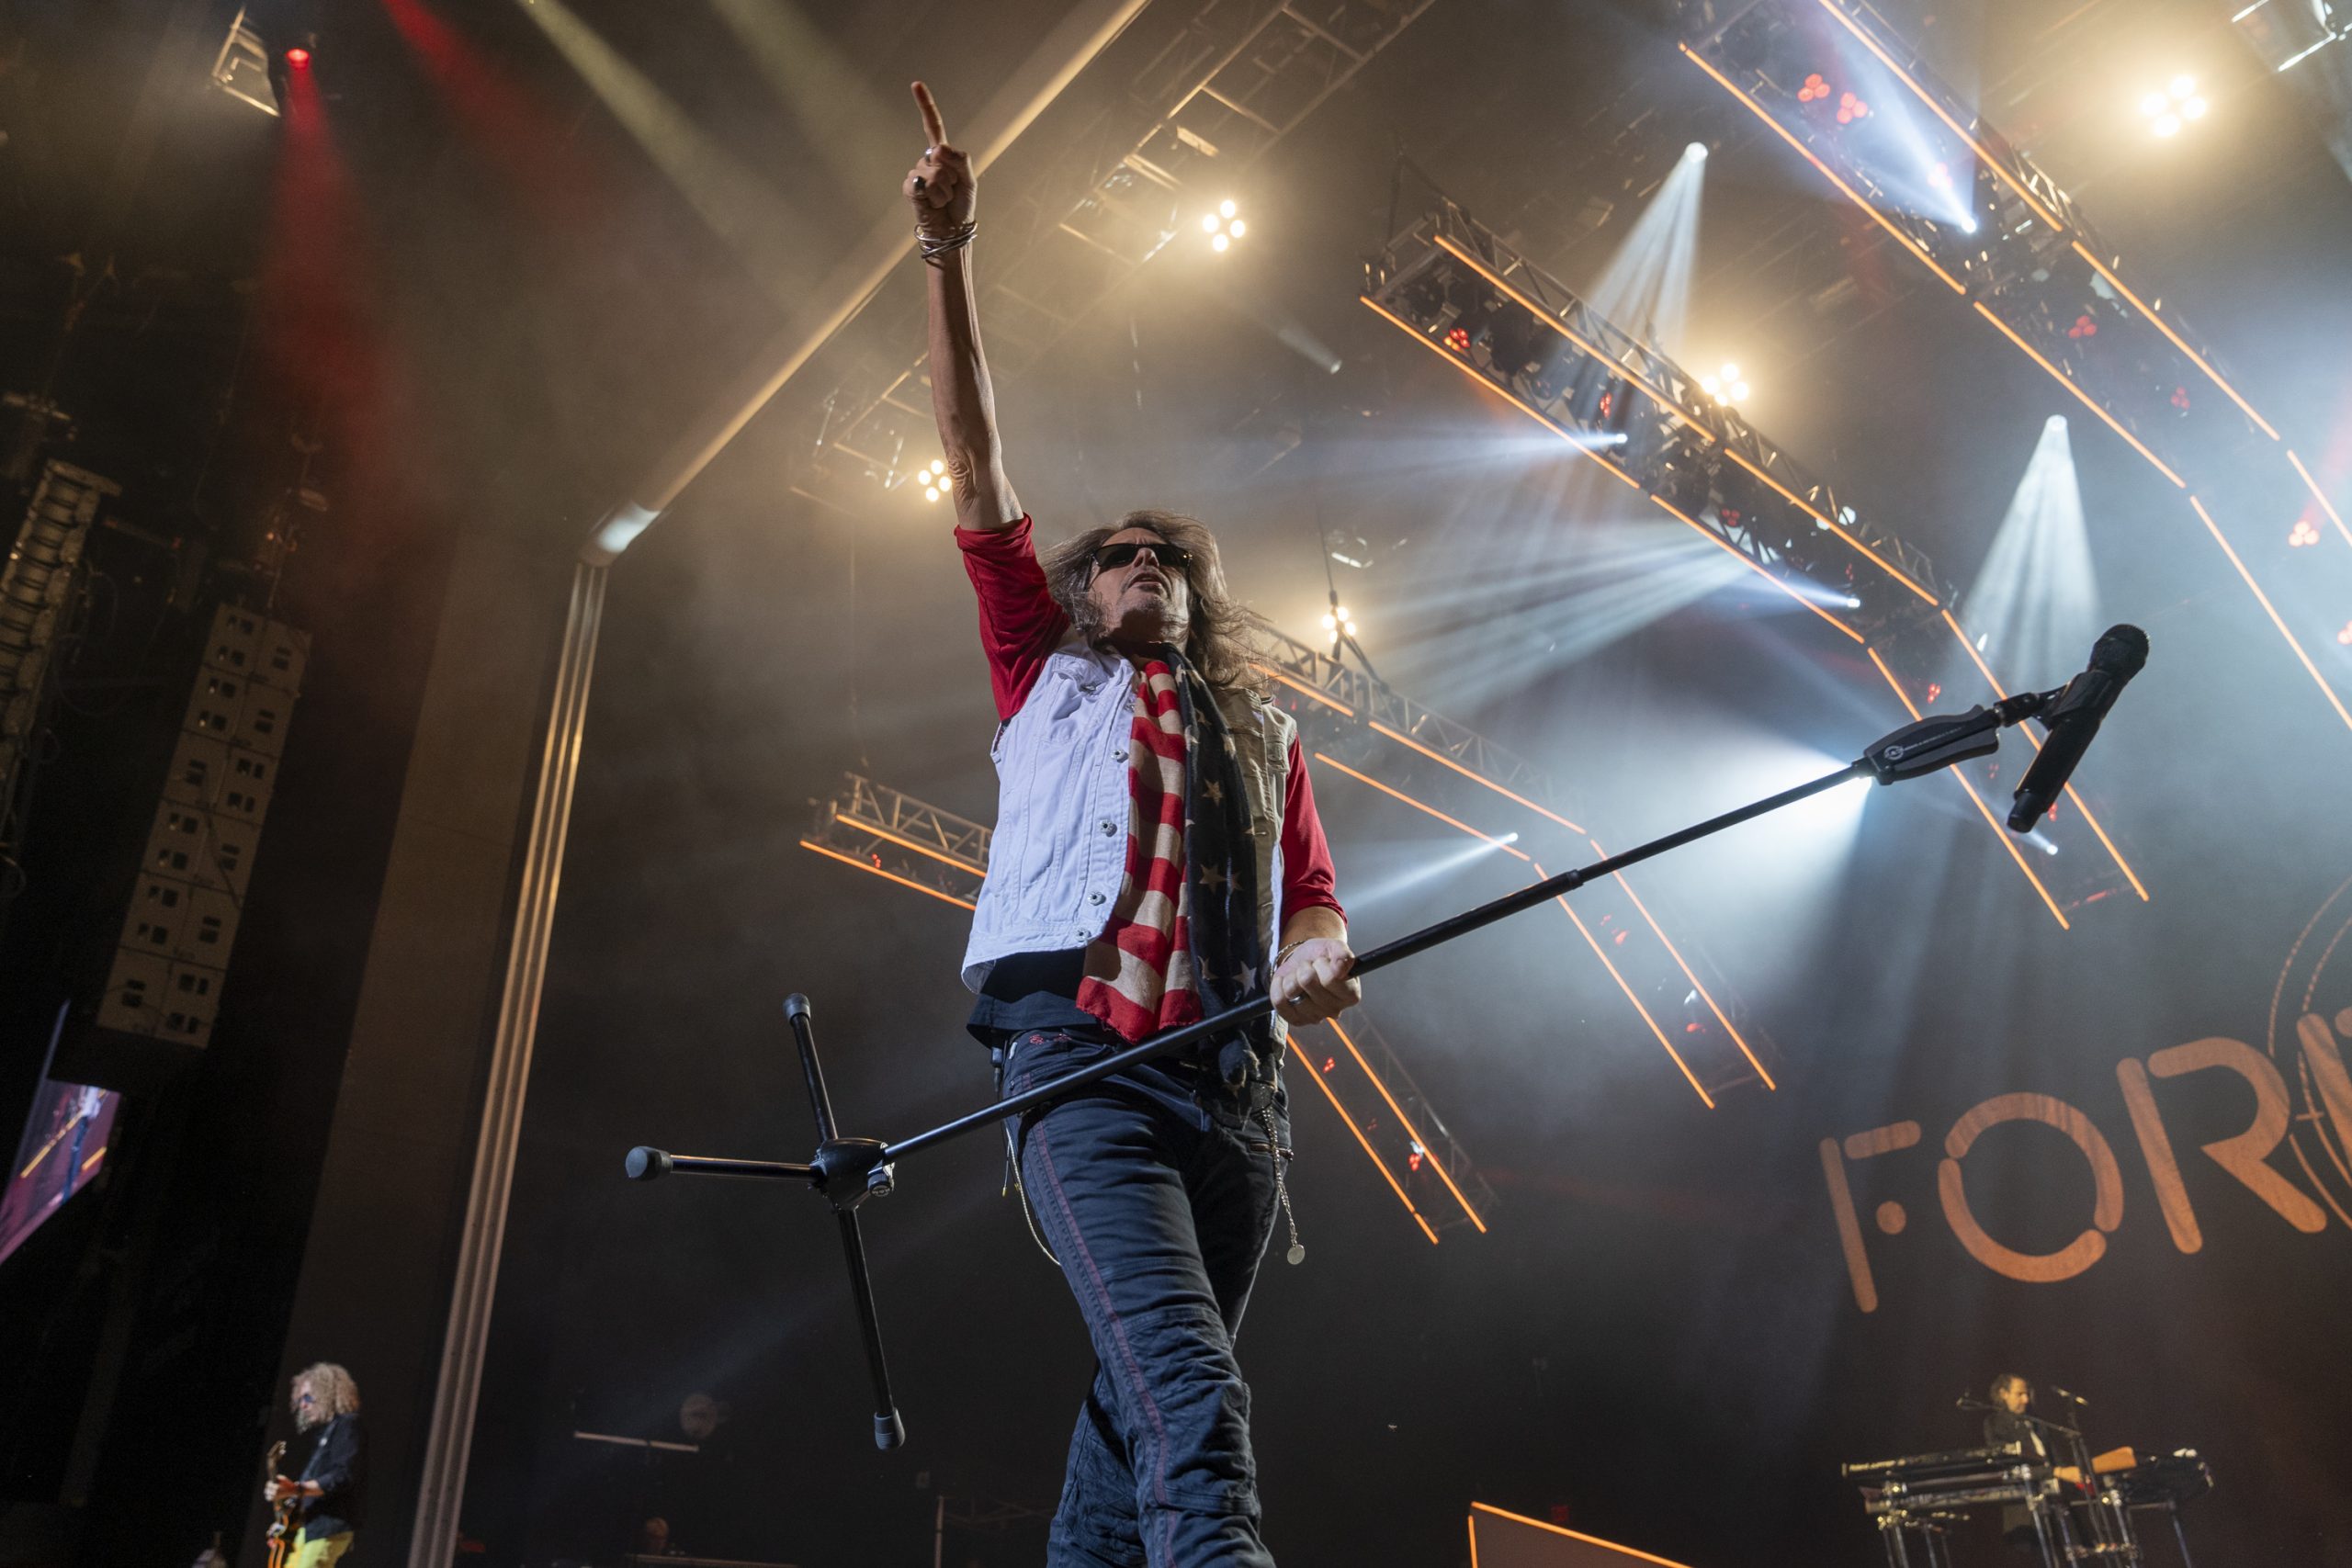 Foreigner lead singer Kelly Hansen opens the show with hit song "Double Vision" at St. Joseph's Health Amphitheater on Saturday, September 2nd, 2023. Photo by Matt Hofmann.